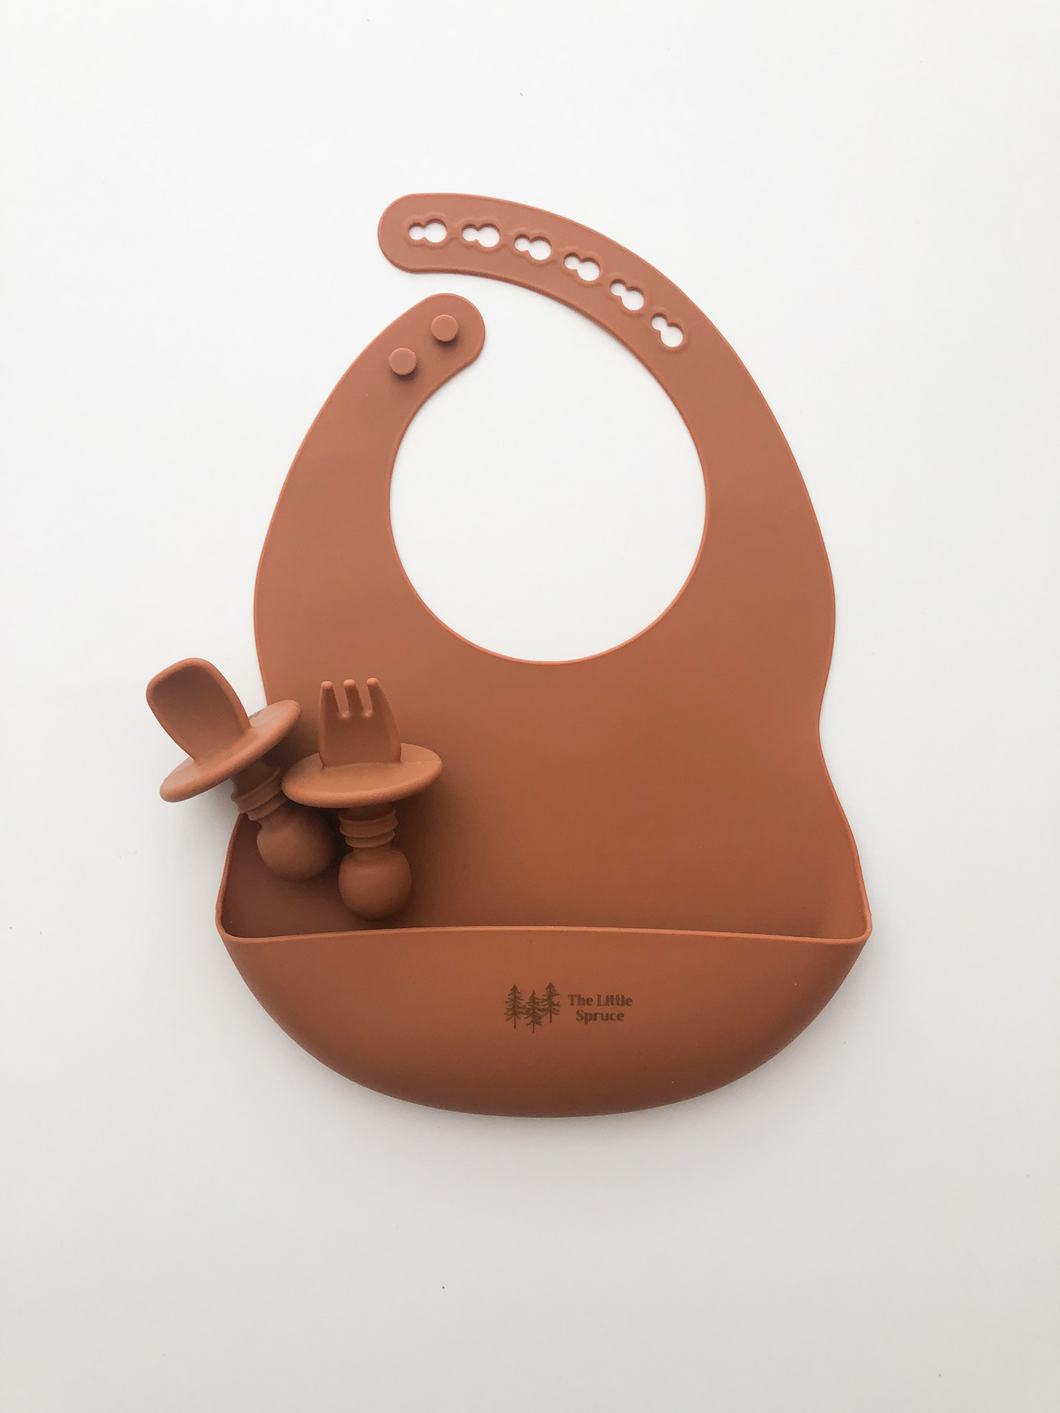 A silicone bib, and baby utensils (fork and spoon) in a burnt orange colour. All the items are meant for use by babies or toddlers.